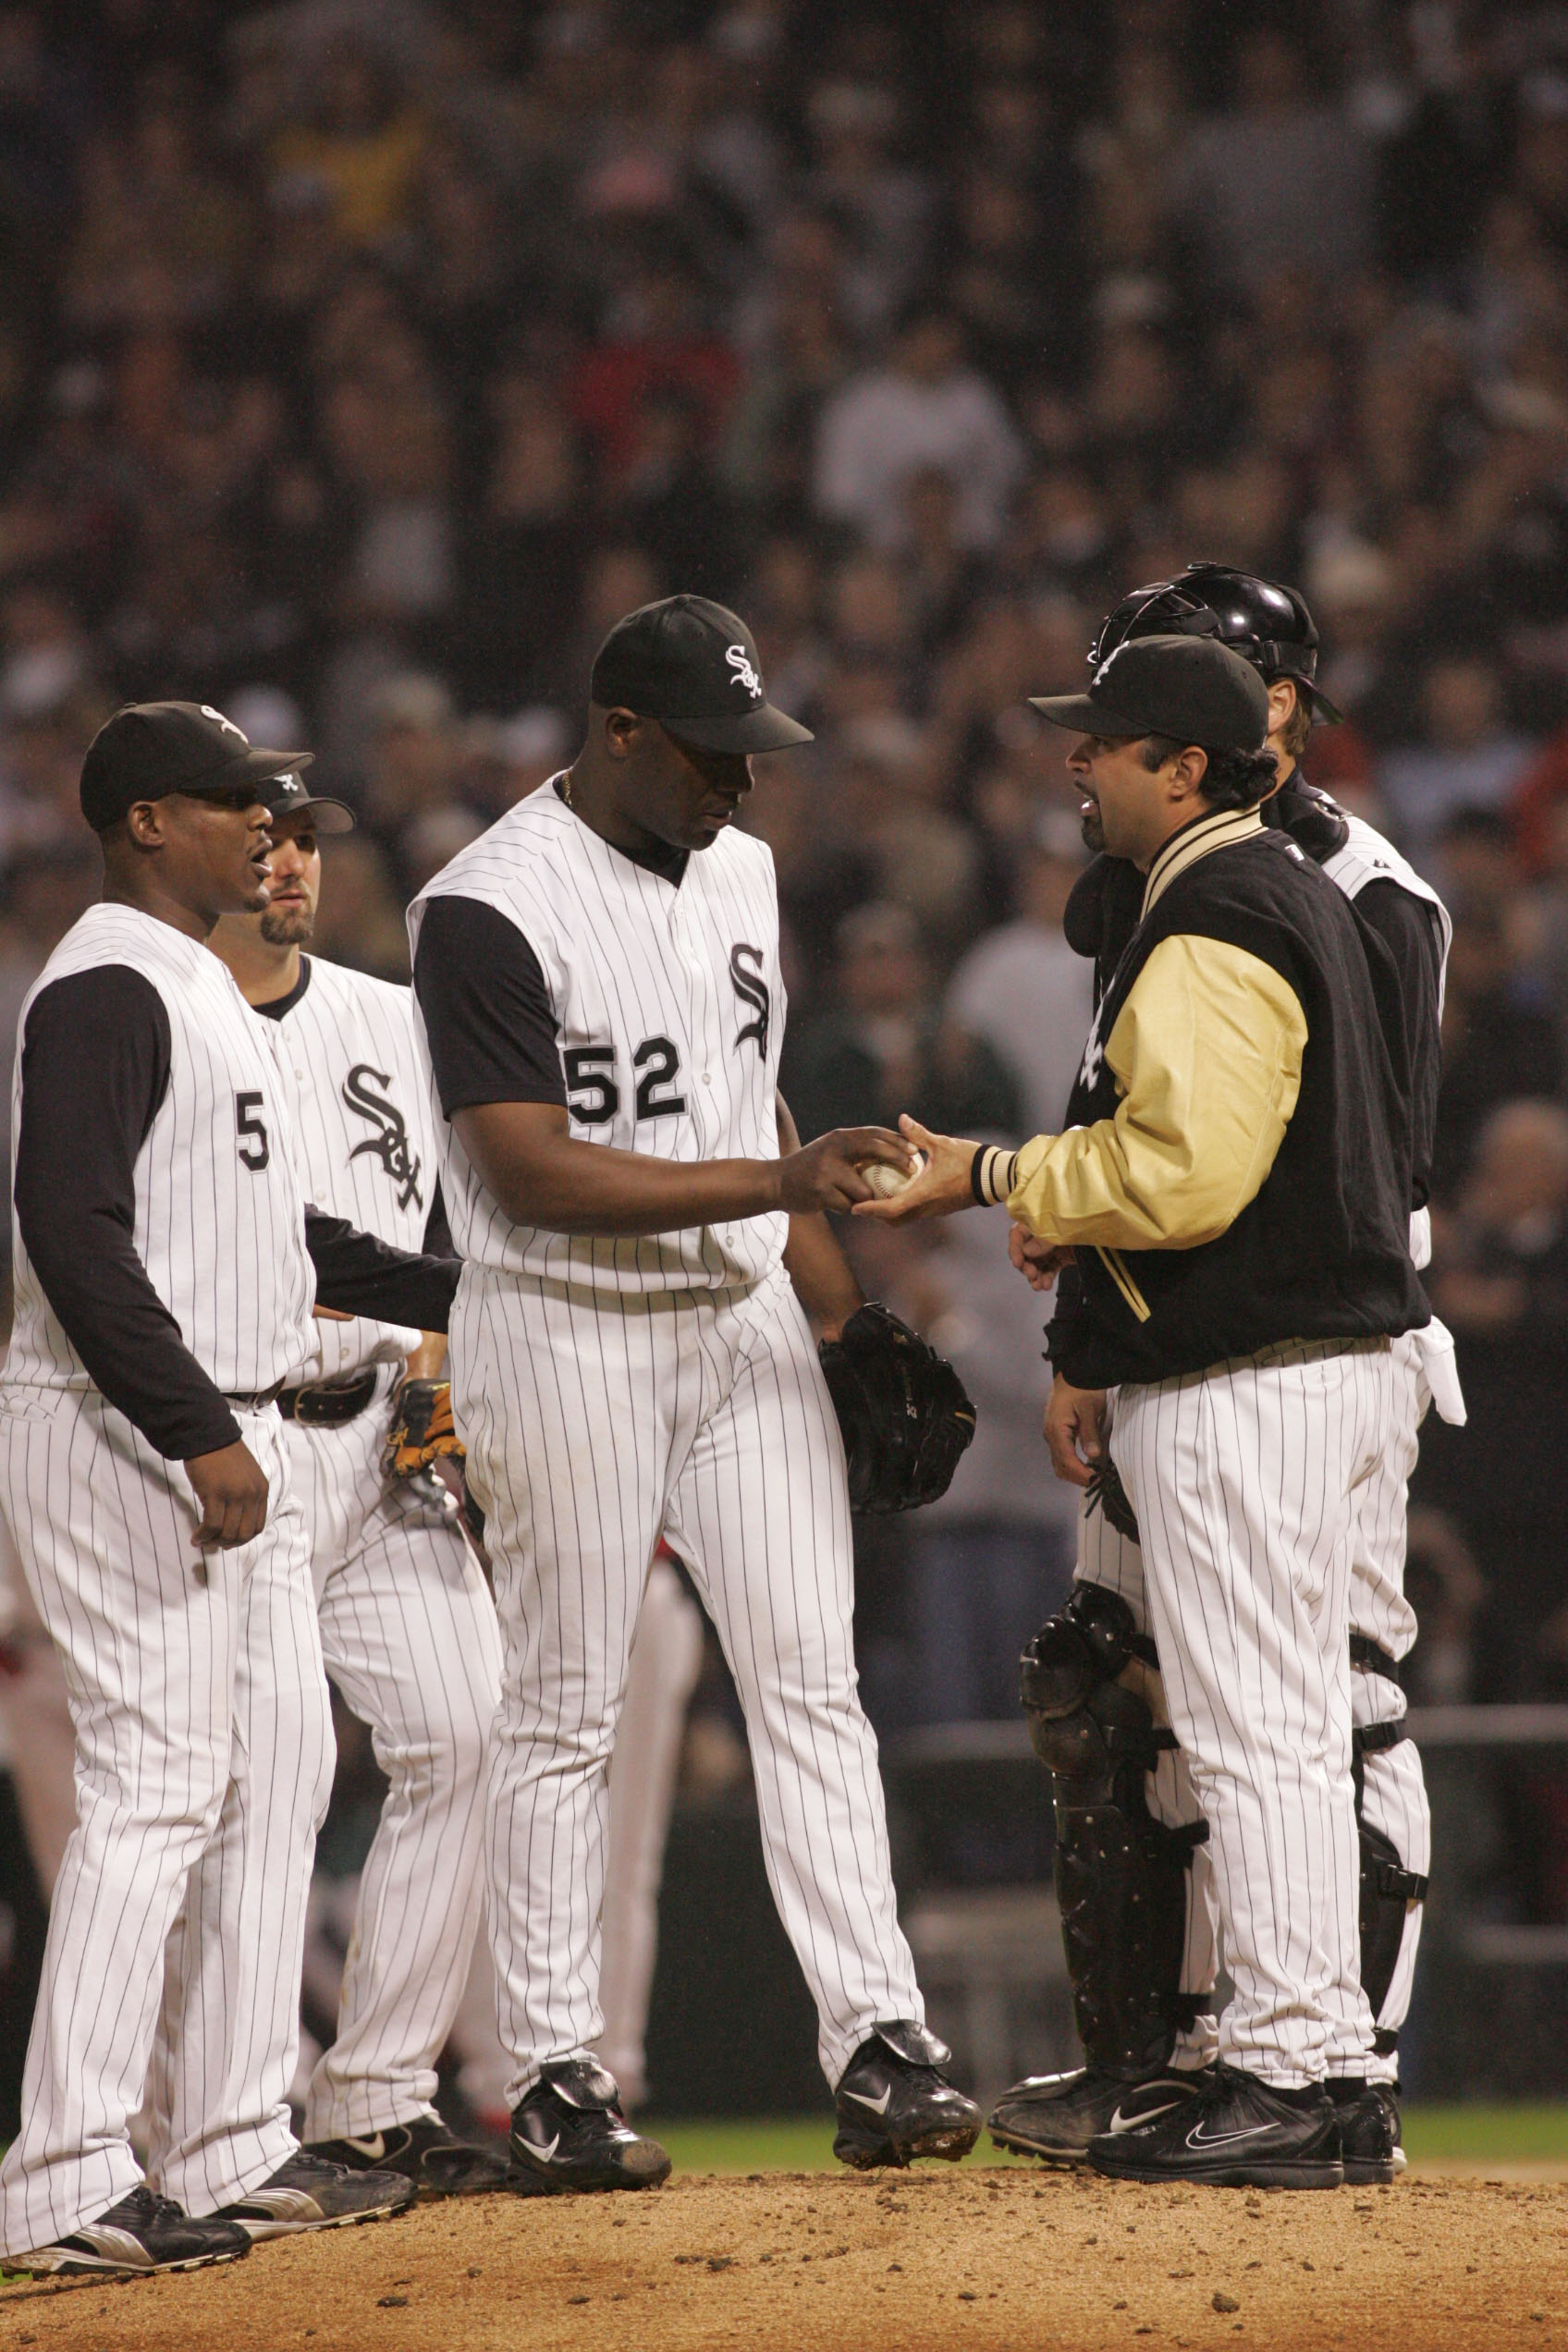 MLB ALCS 2005: L.A Angels at Chicago White Sox - Game 1